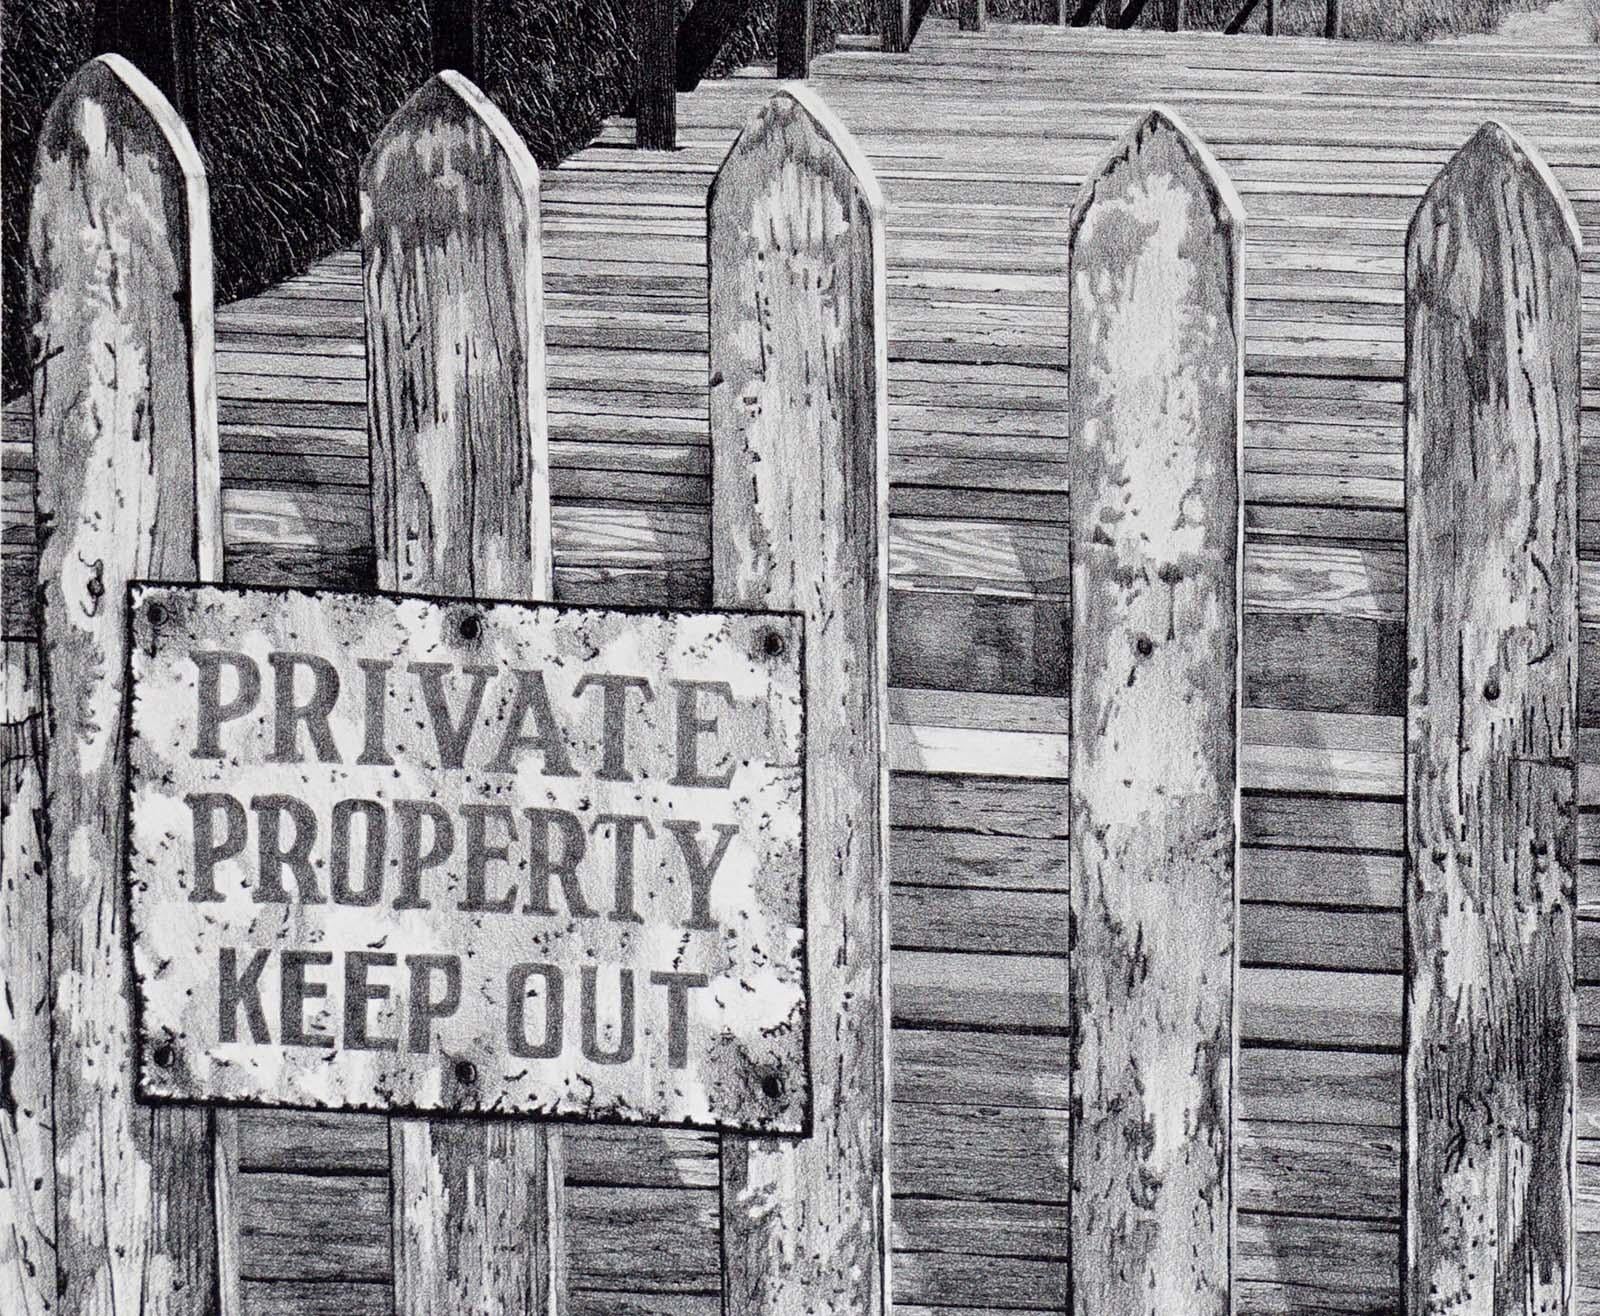 Private Property (Jamaica Bay in Queens NY - now a runaway of JFK airport) - Print by Martin Levine